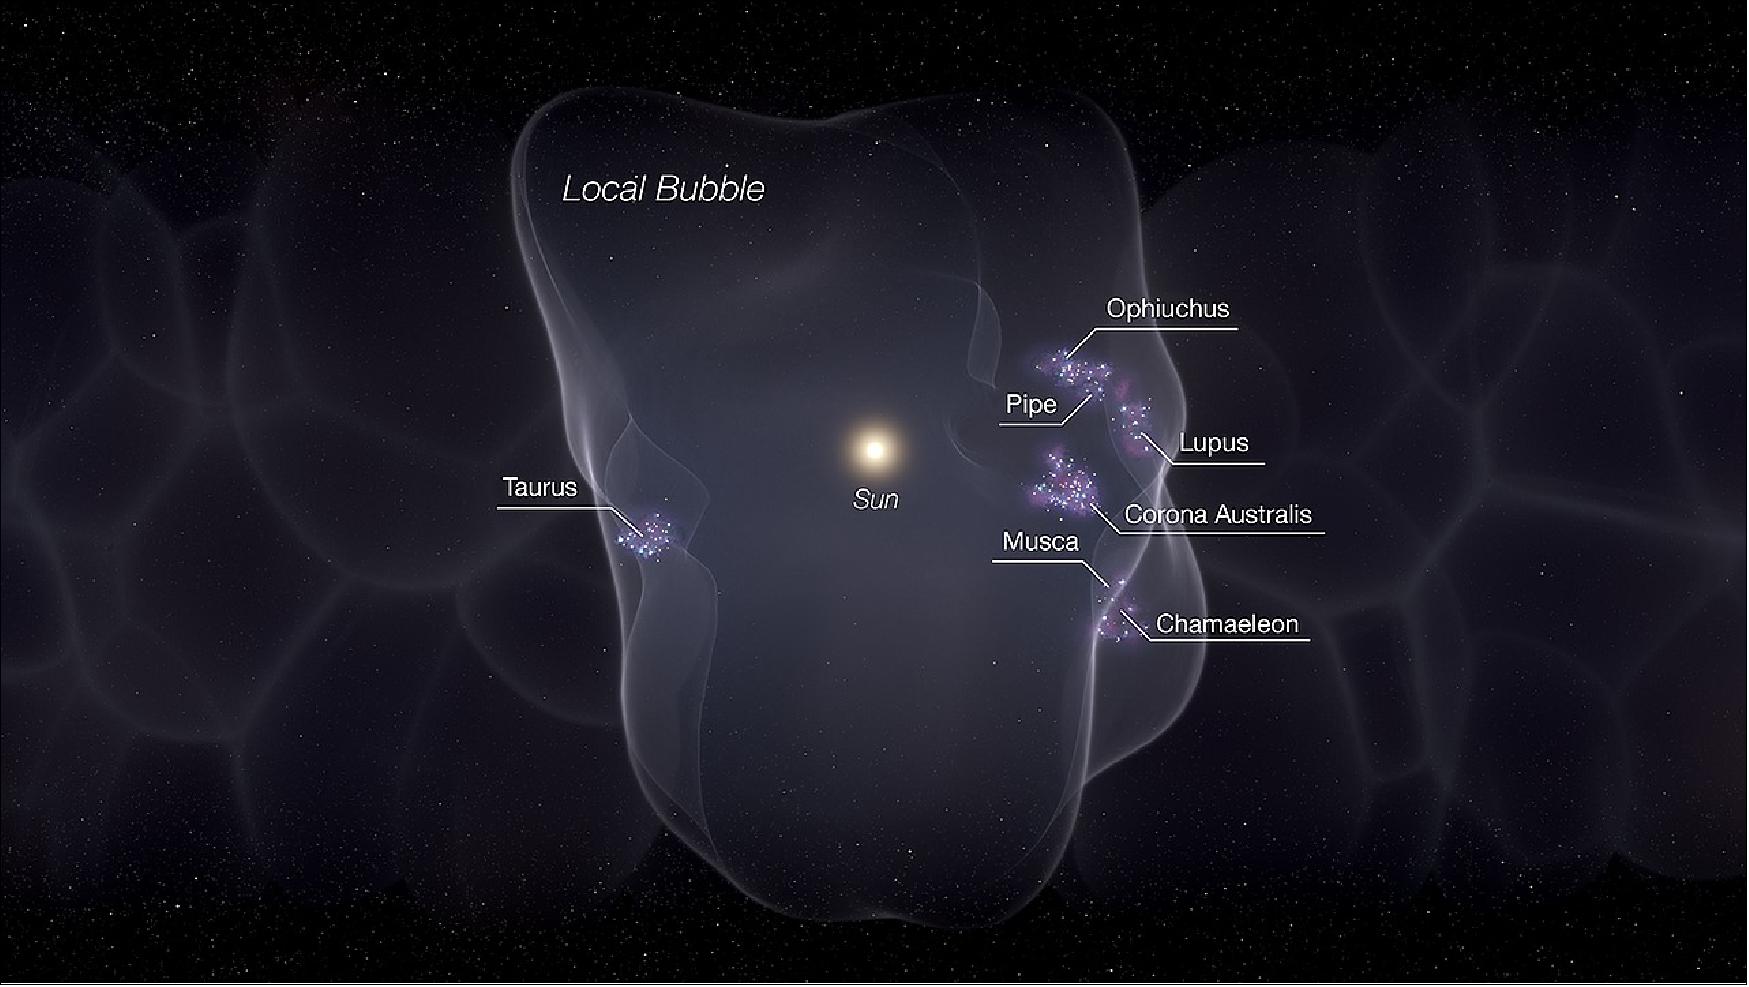 Figure 84: Annotated illustration of the Local Bubble's Star-forming Regions [image credit: CfA, Leah Hustak (STScI)]